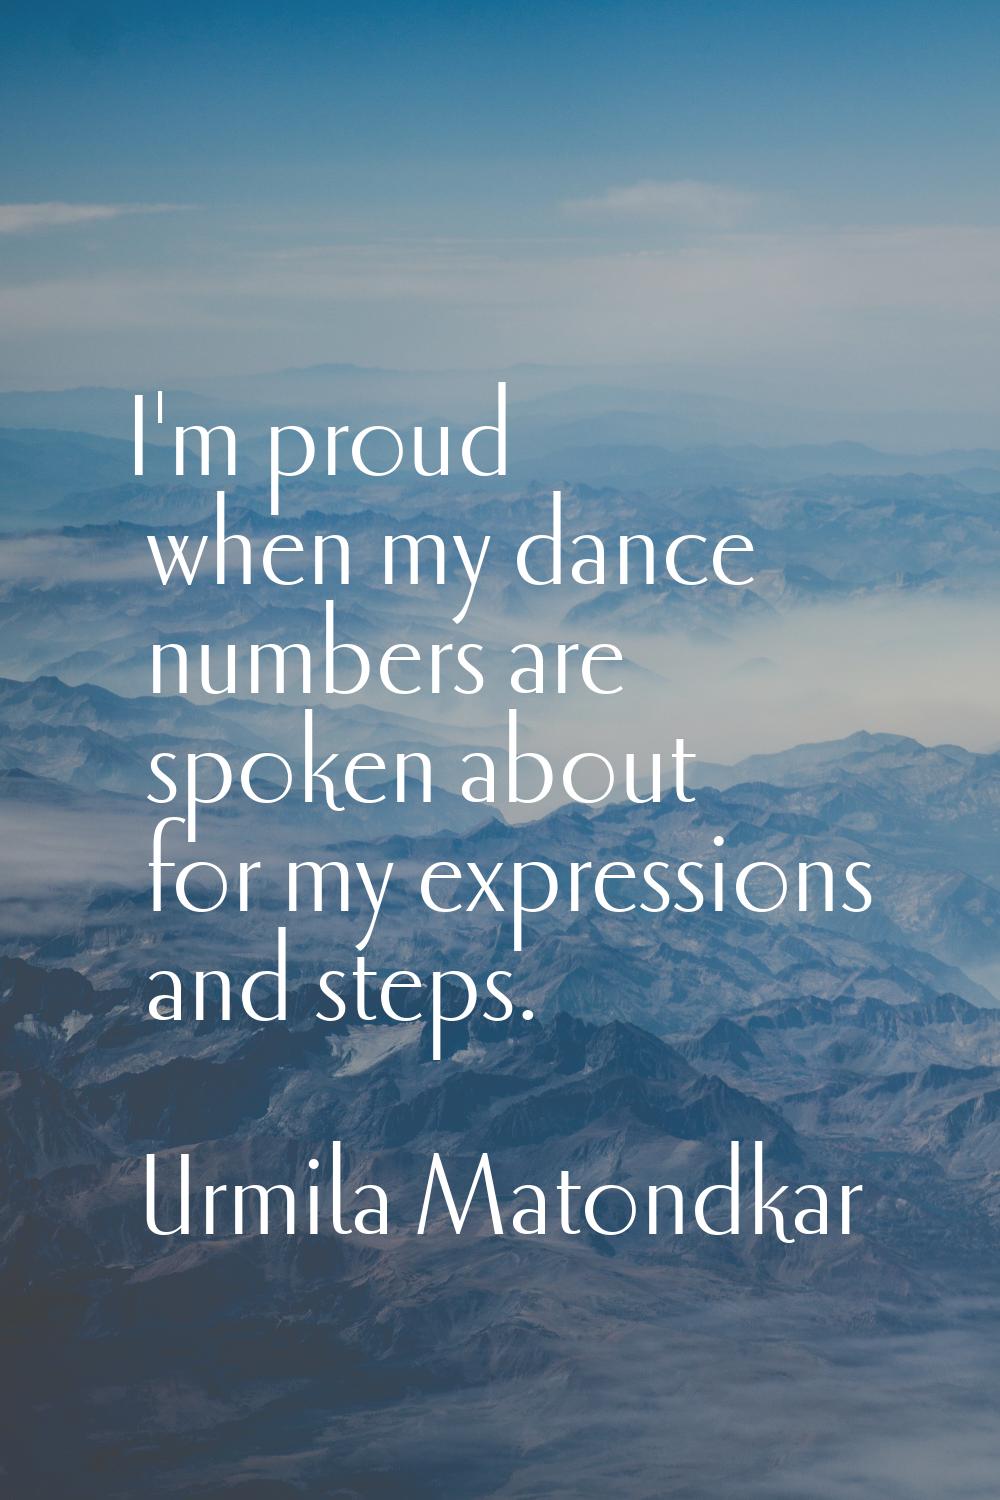 I'm proud when my dance numbers are spoken about for my expressions and steps.